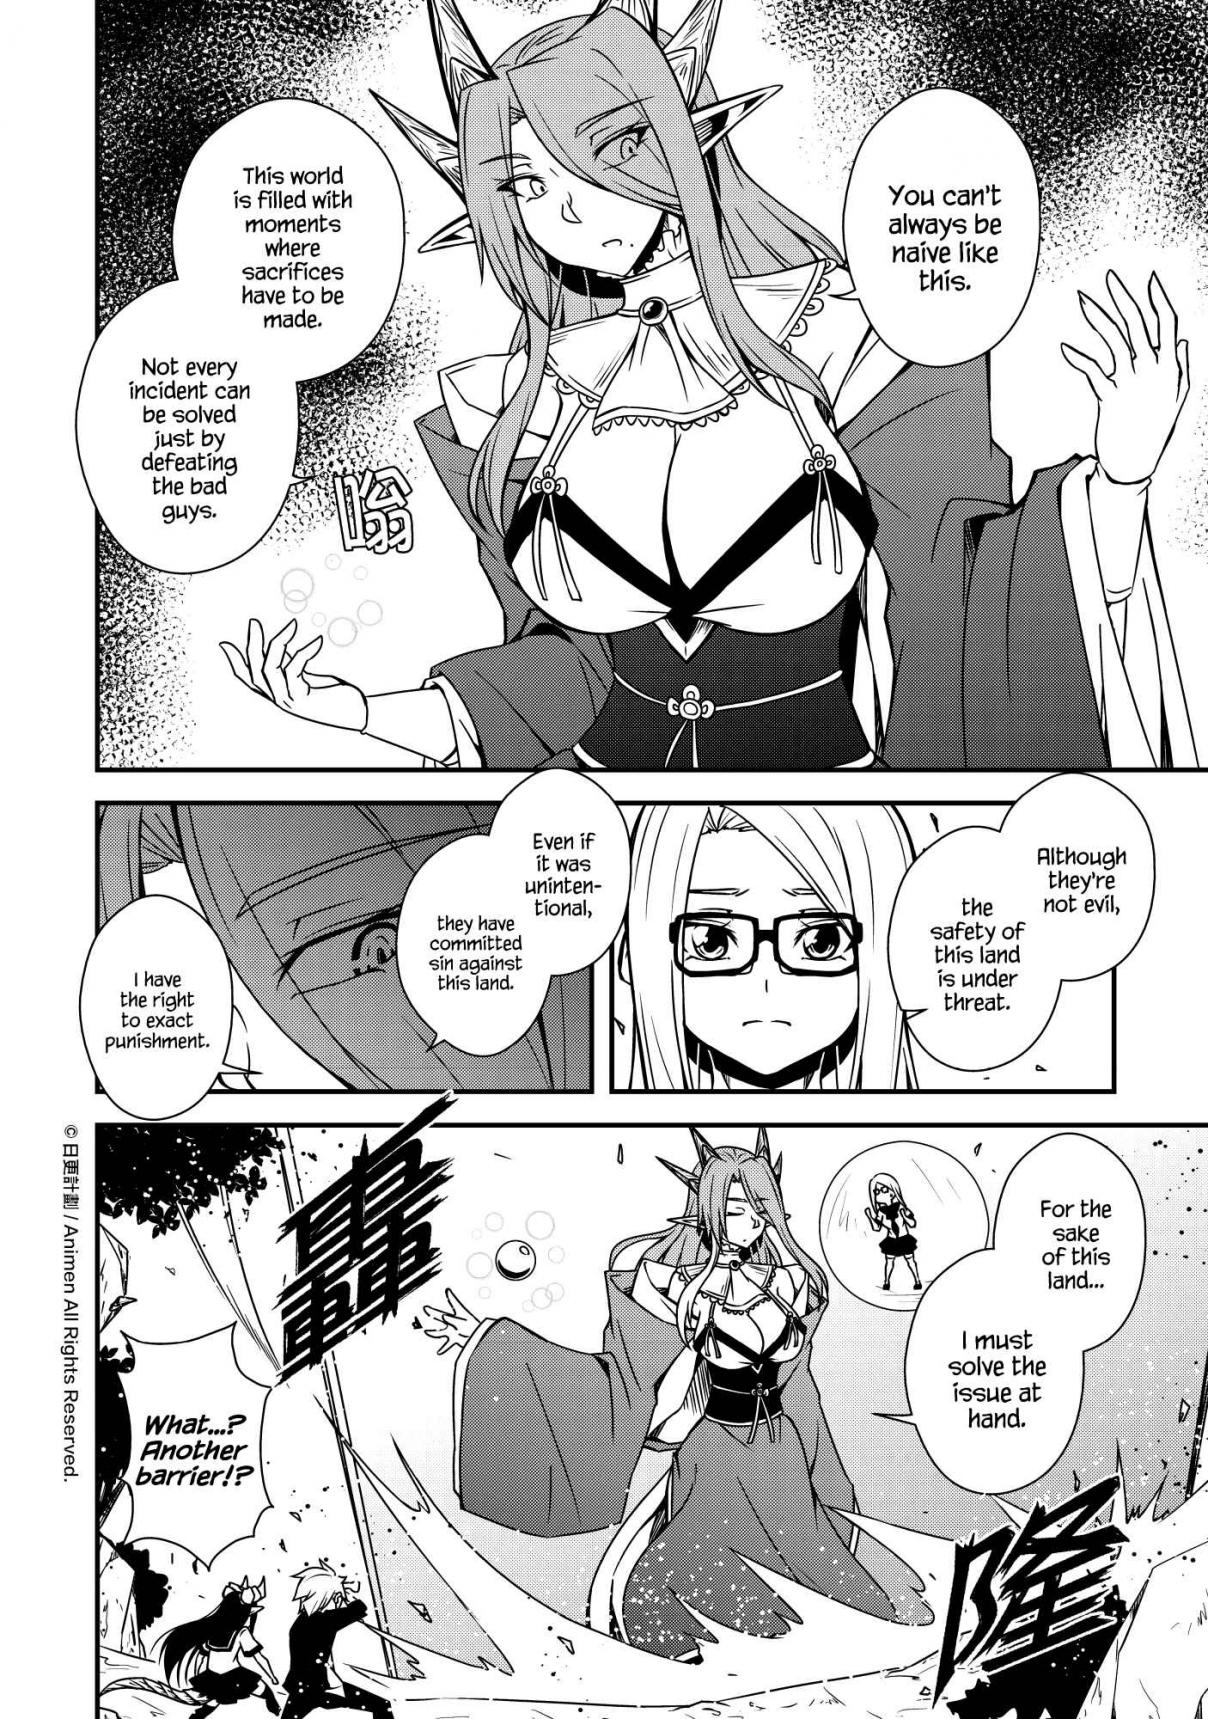 The Girl With Horns Vol. 1 Ch. 9 The Past and Future